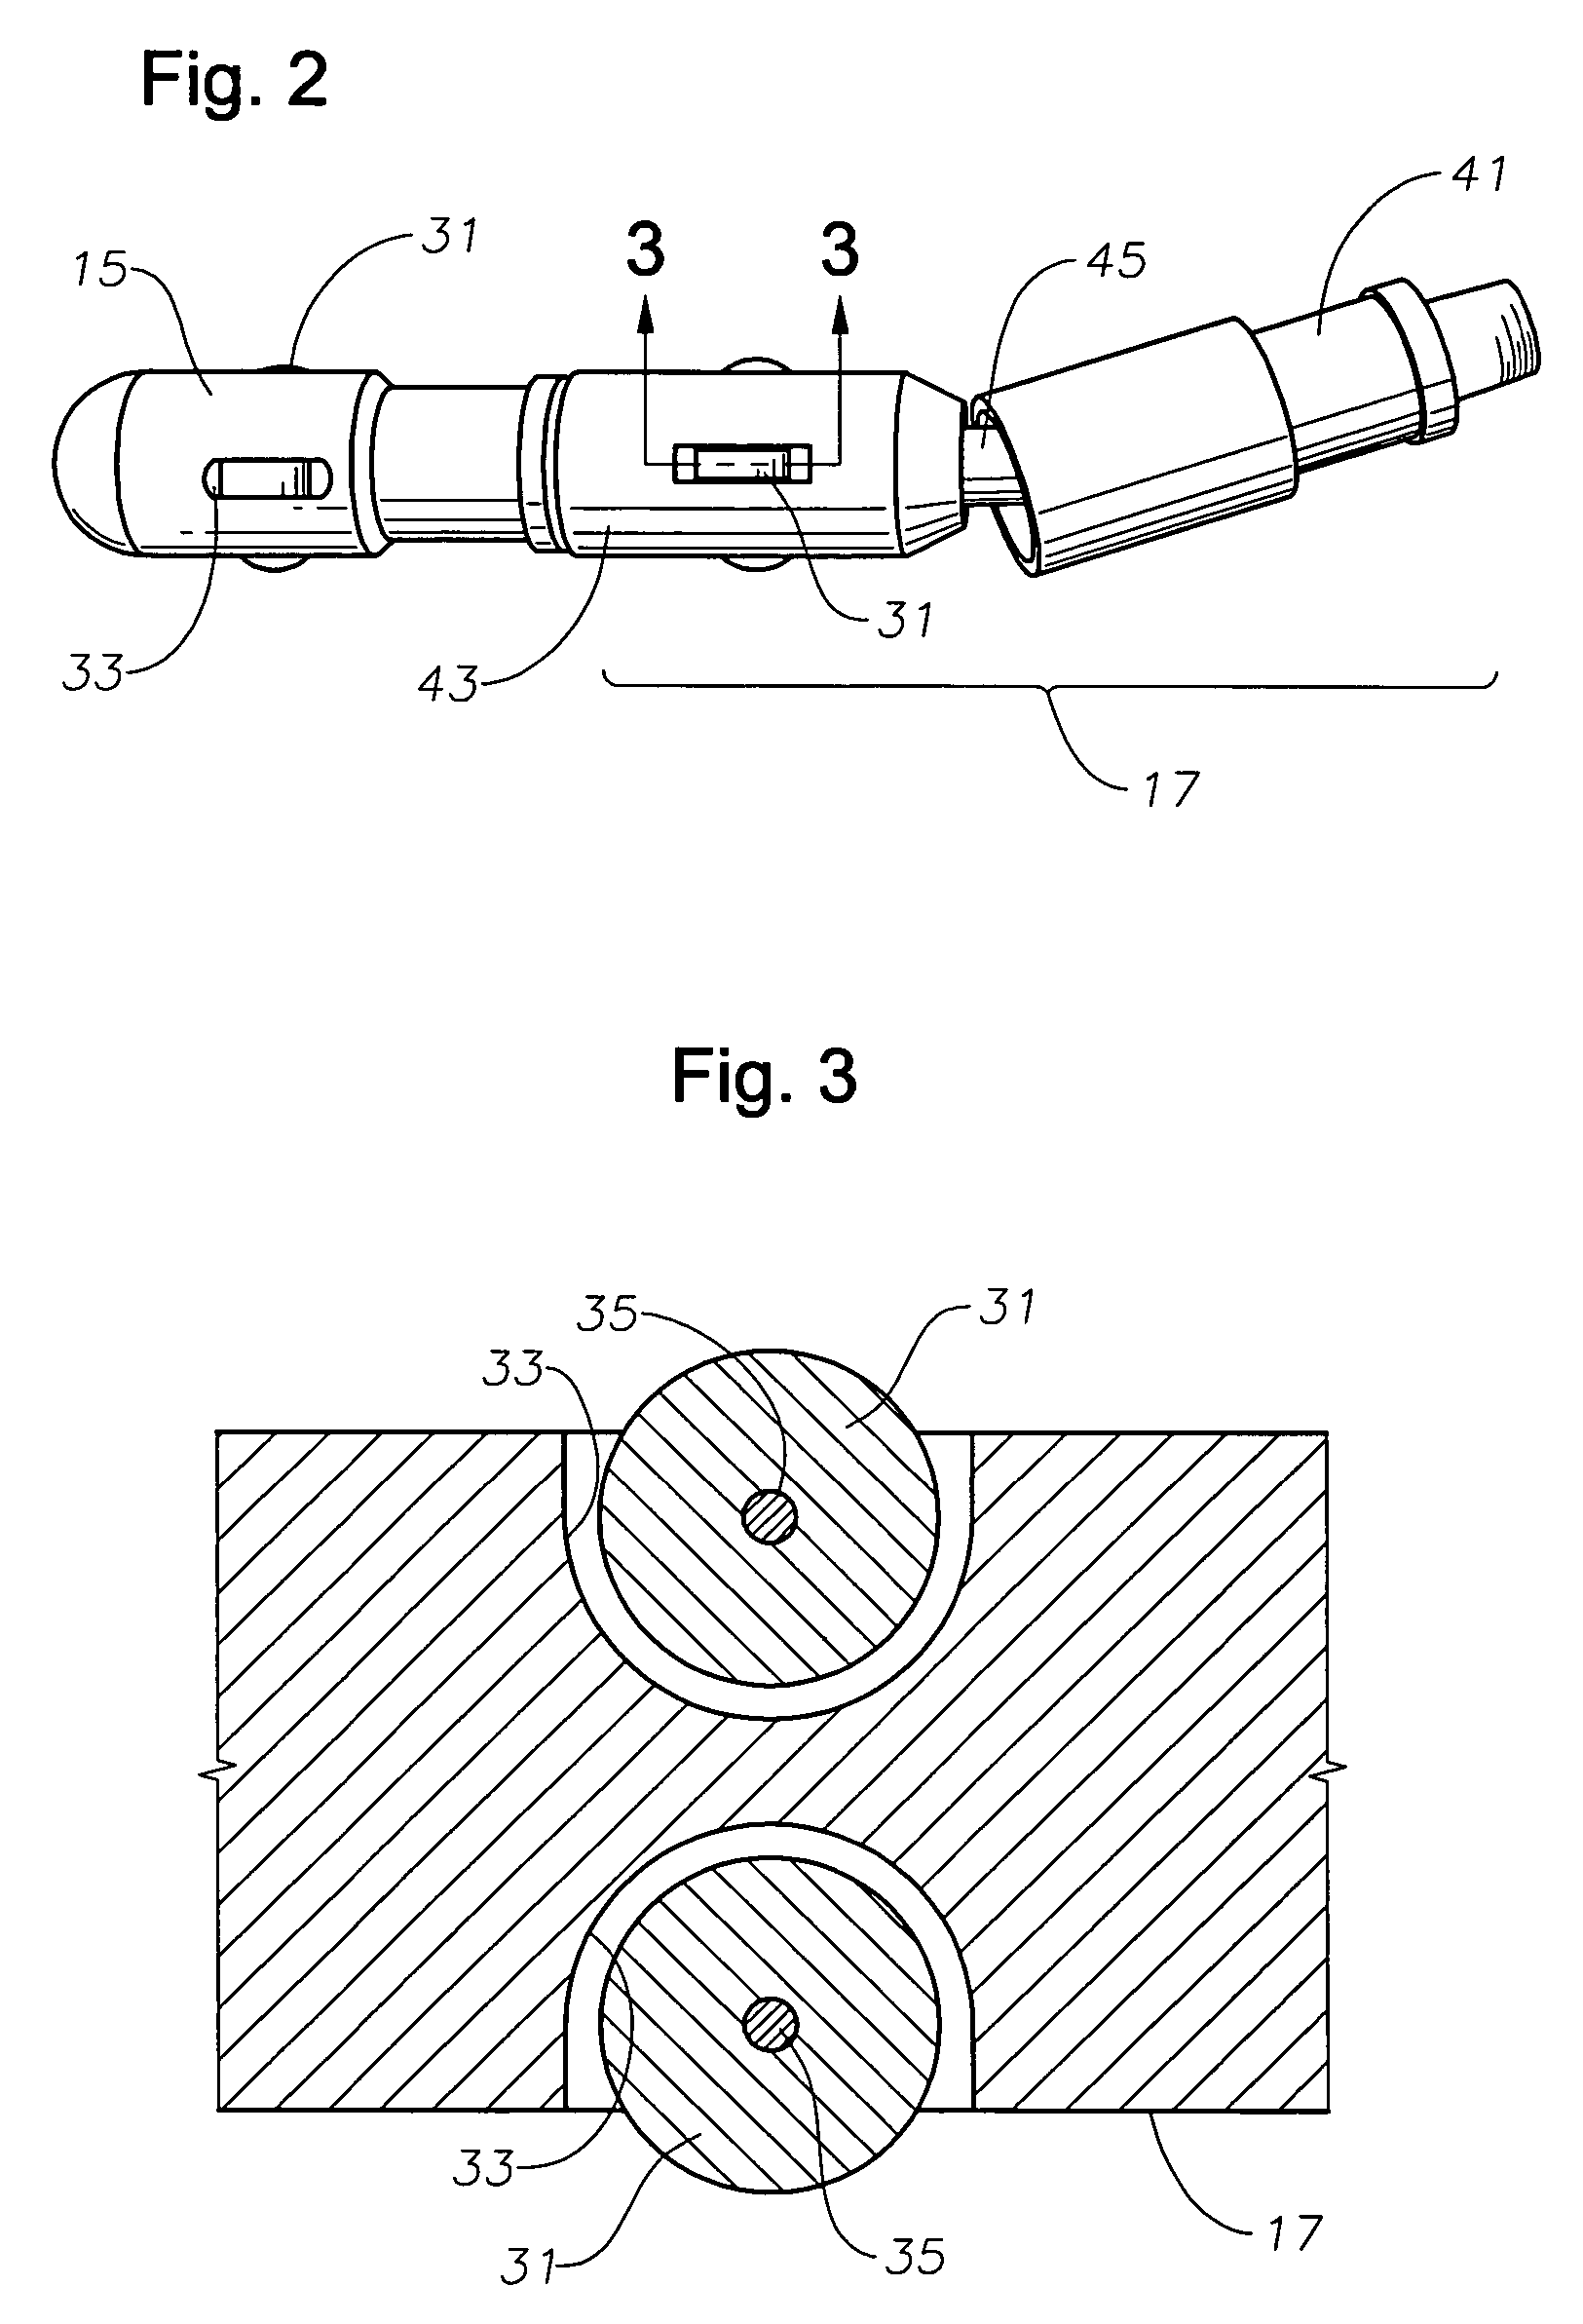 System, method, and apparatus for survey tool having roller knuckle joints for use in highly deviated horizontal wells